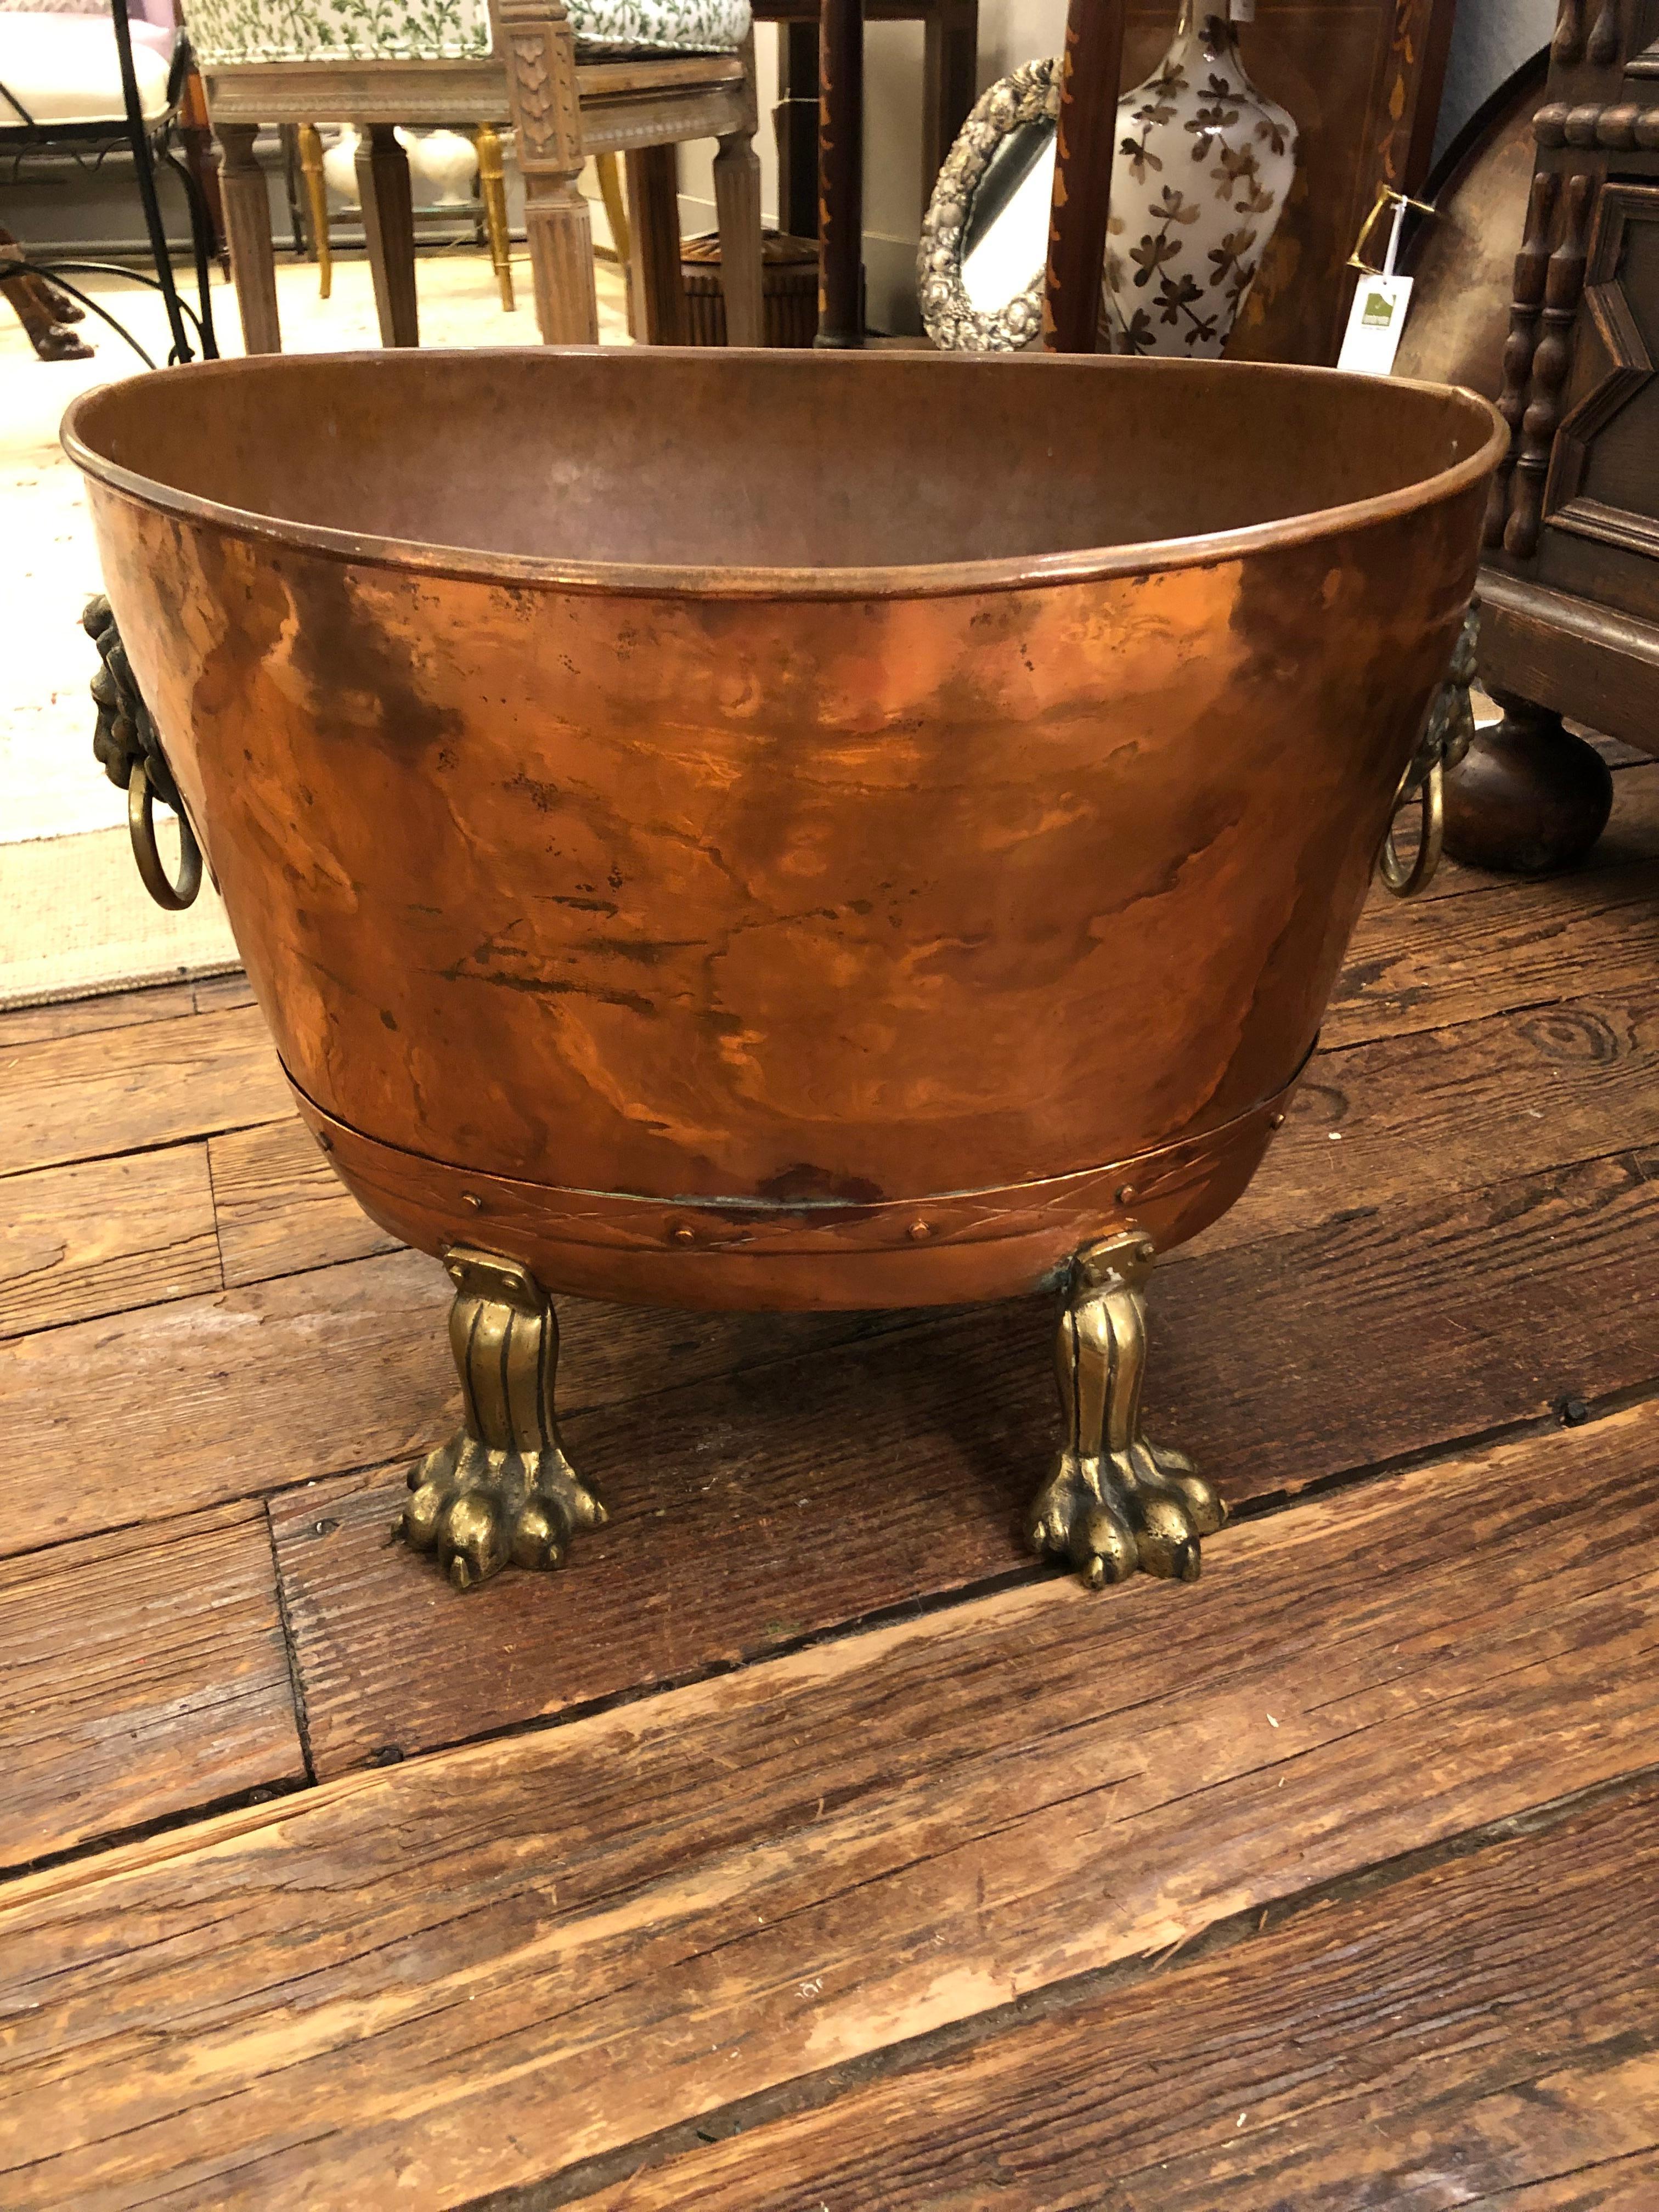 Gorgeous antique copper log kindling holder having an oval shape and fantastic brass lion ring holders on each side and large paw feet. Beautiful enough to hold magazines or be used as a centerpiece filled with a plant or decorative branches.